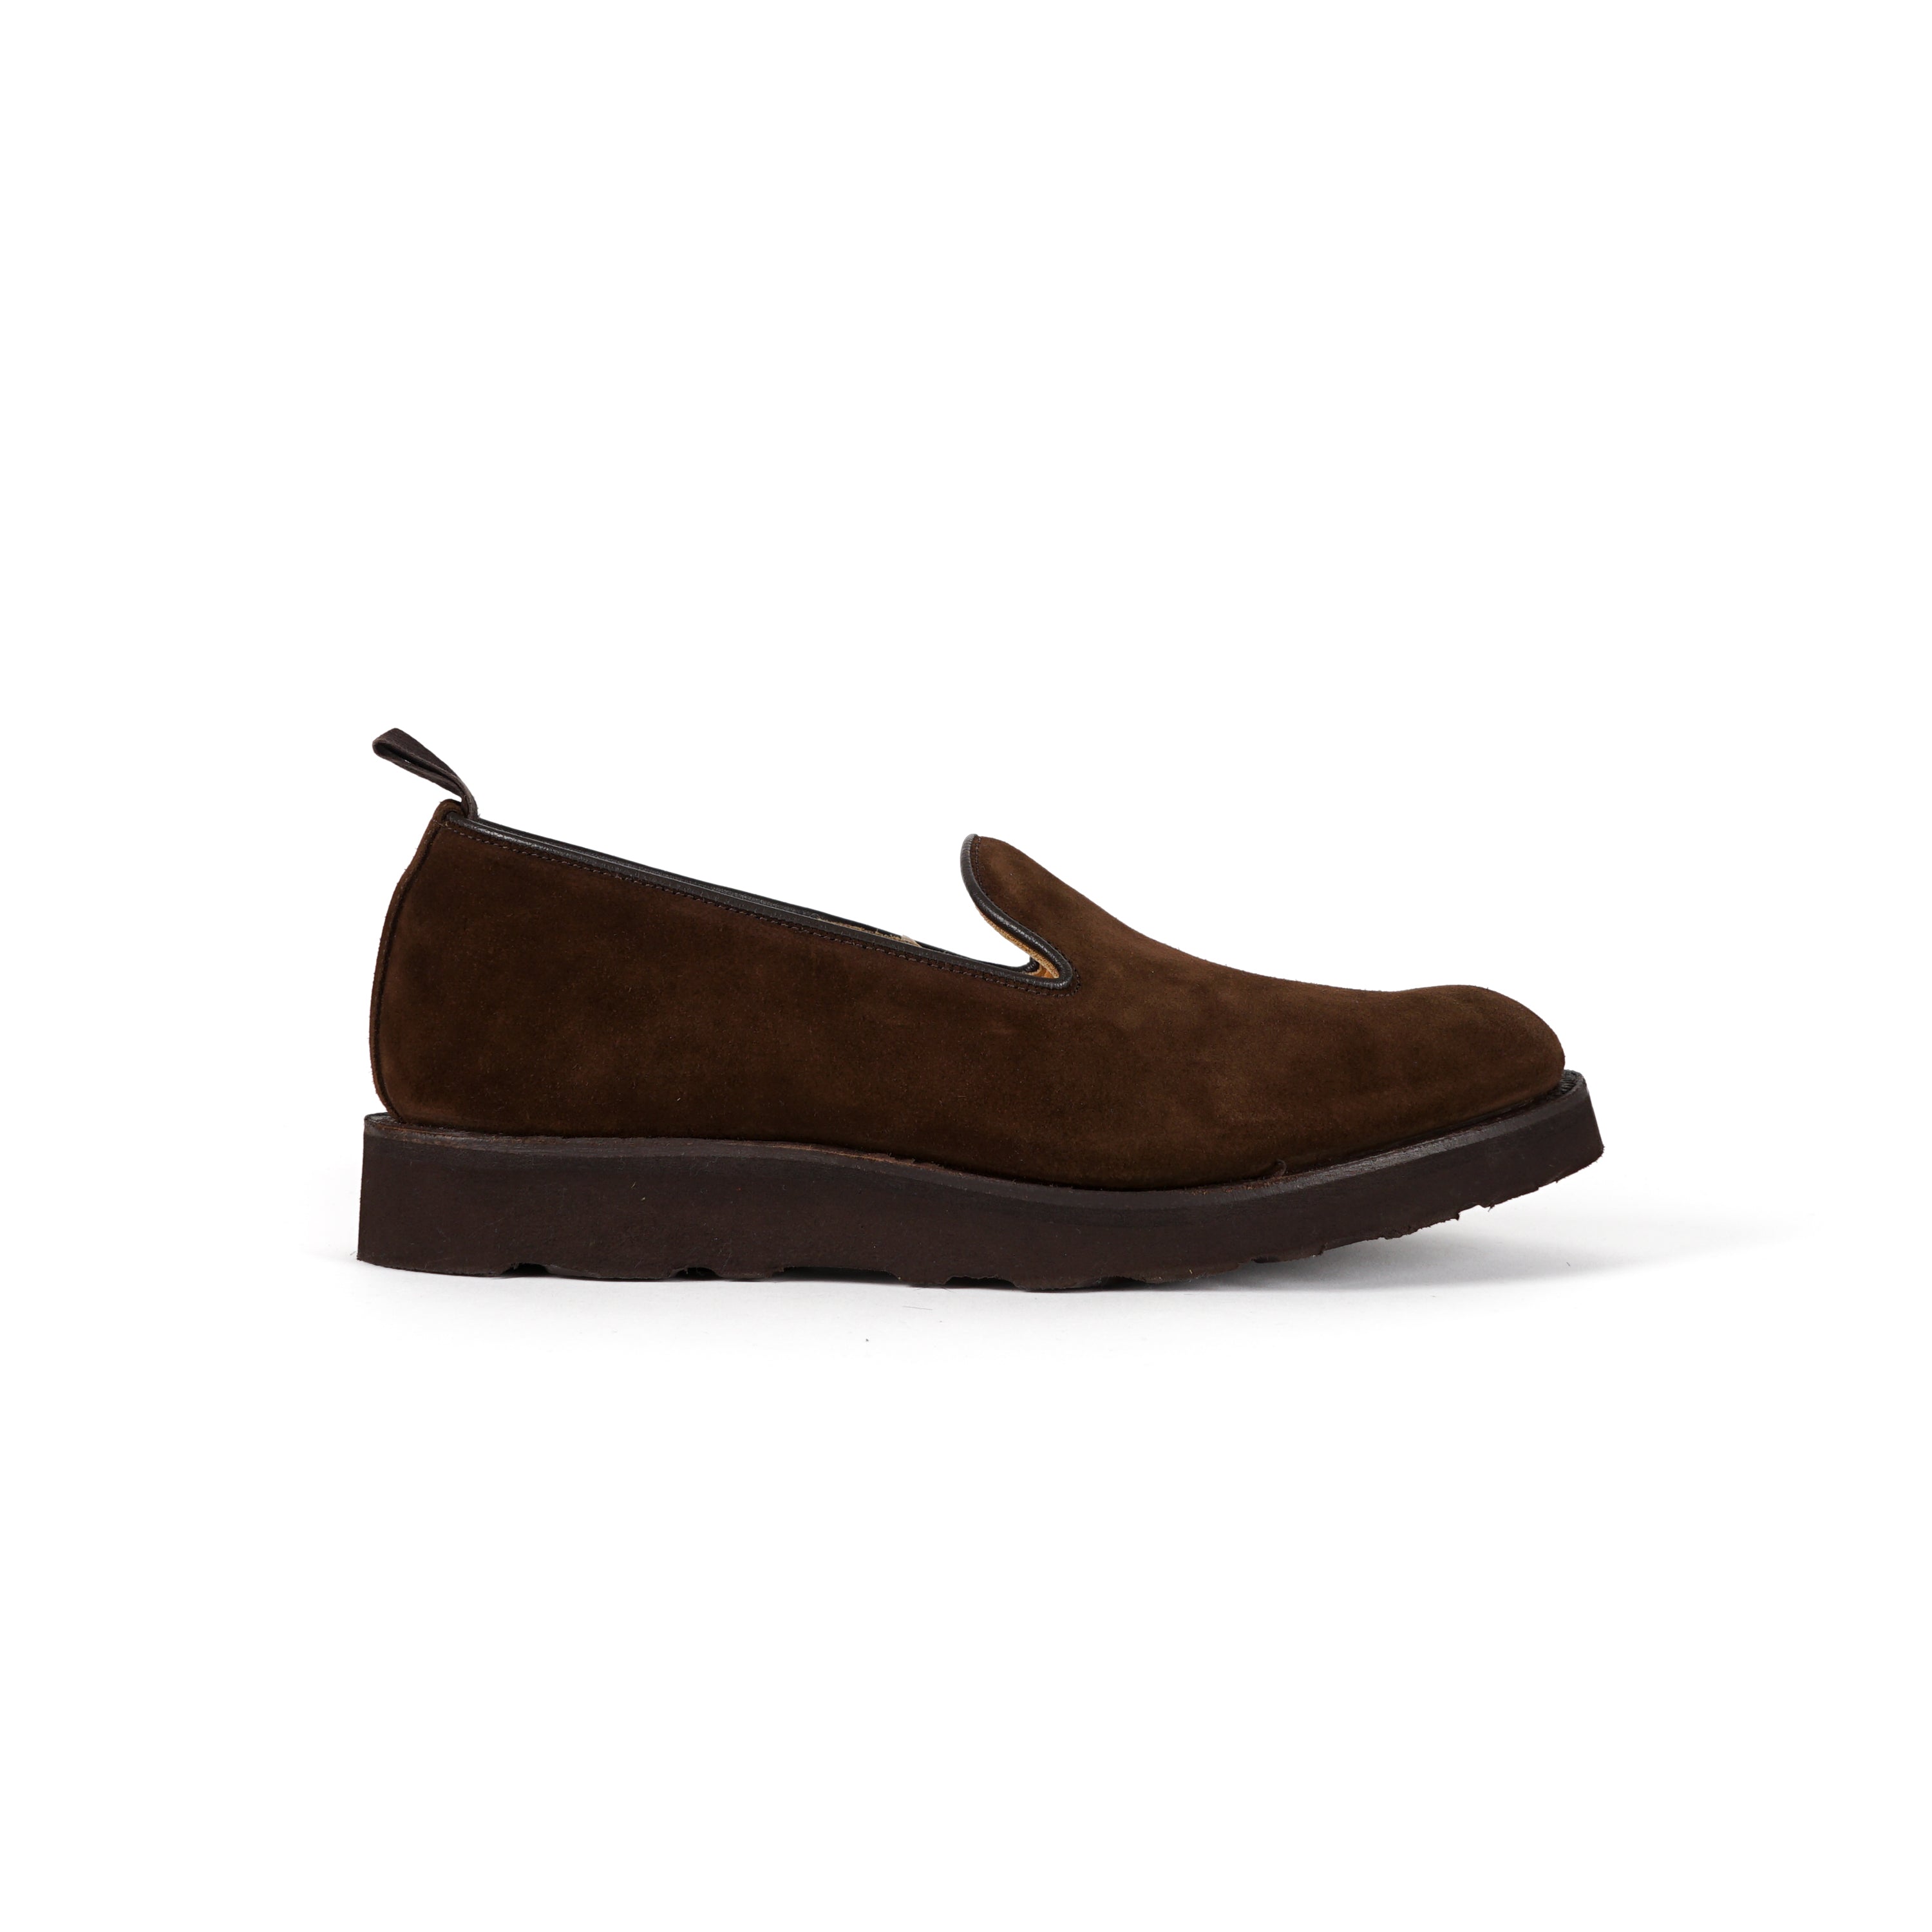 Golf Loafer - Chocolate Suede